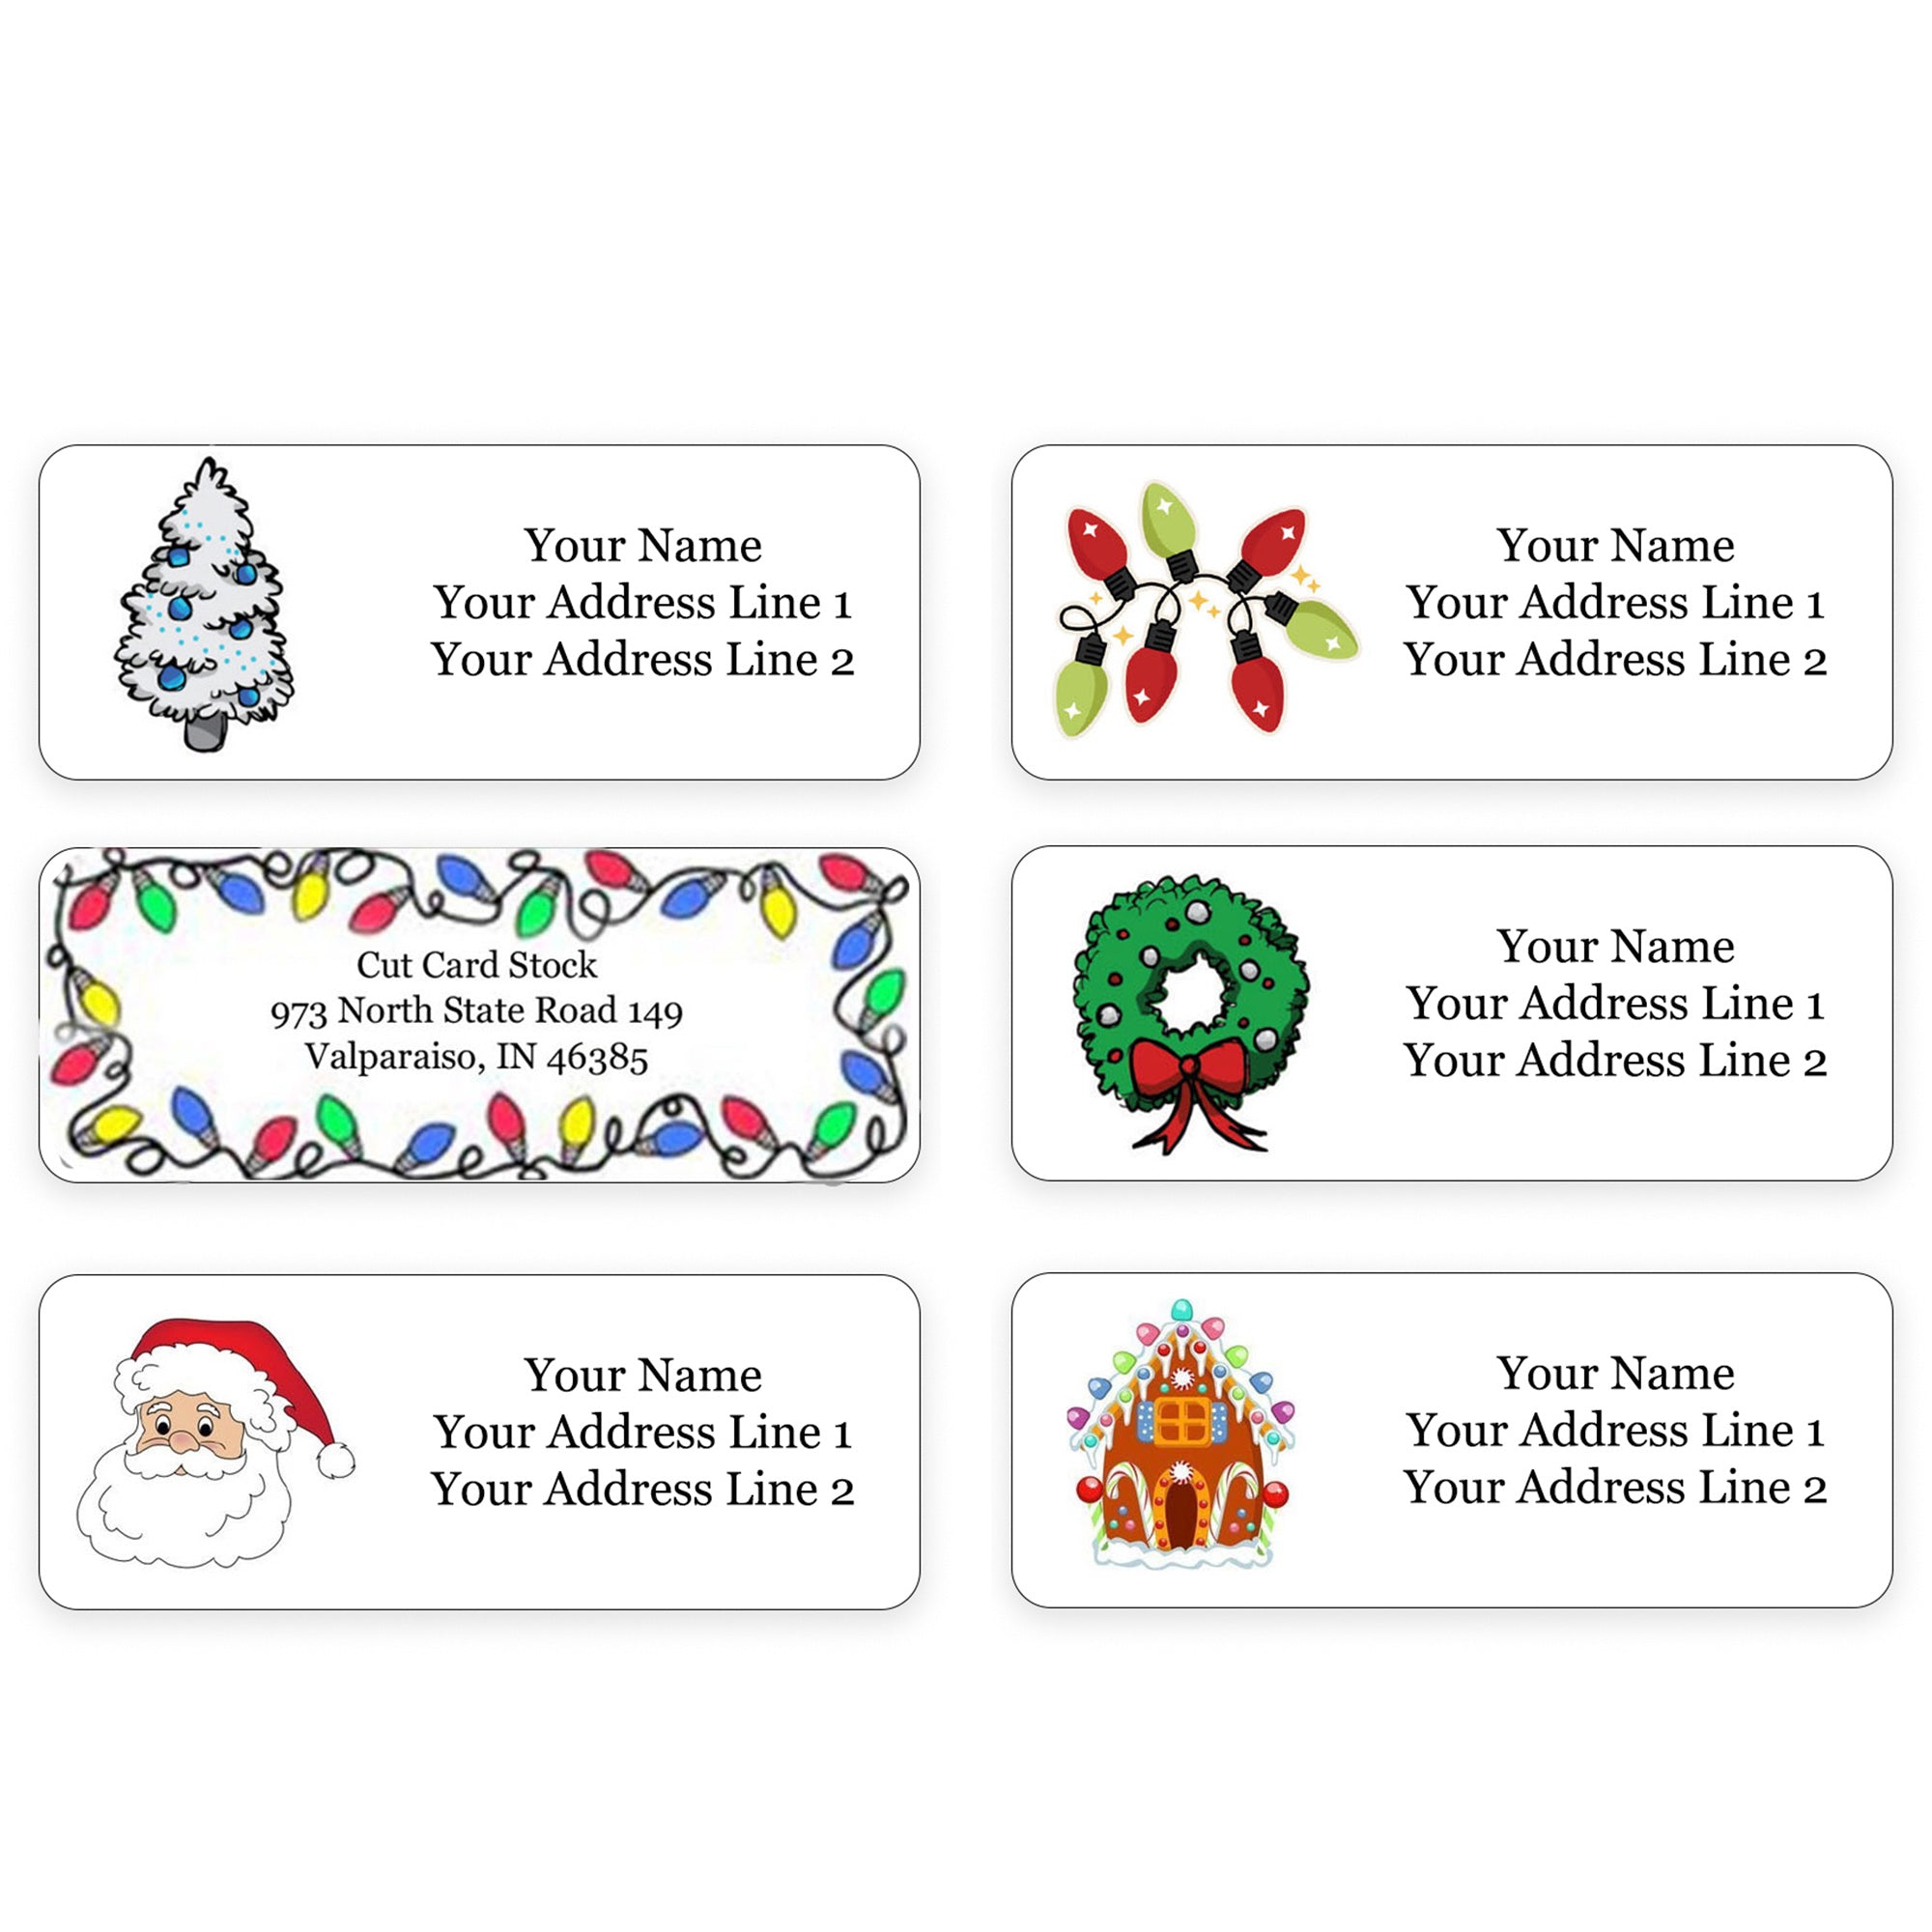 personalized-christmas-theme-return-address-labels-for-holiday-envelop-cutcardstock